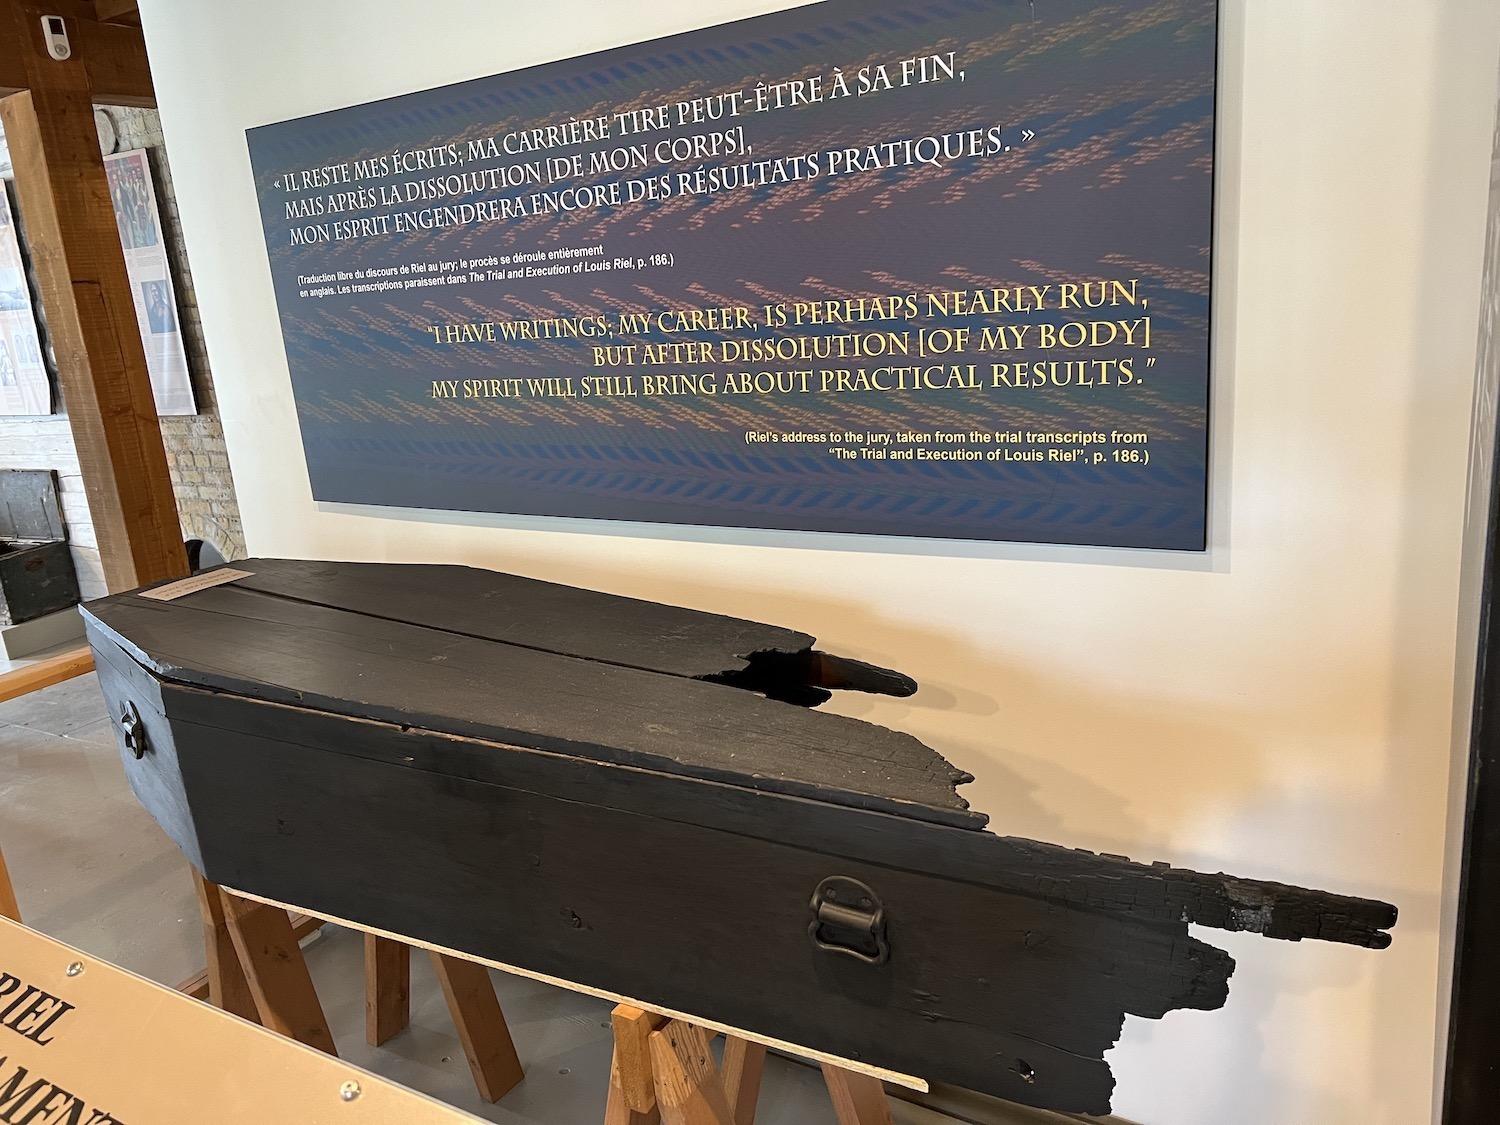 The charred coffin that Louis Riel's body was first placed in is now at Le Musée de Saint-Boniface Museum.